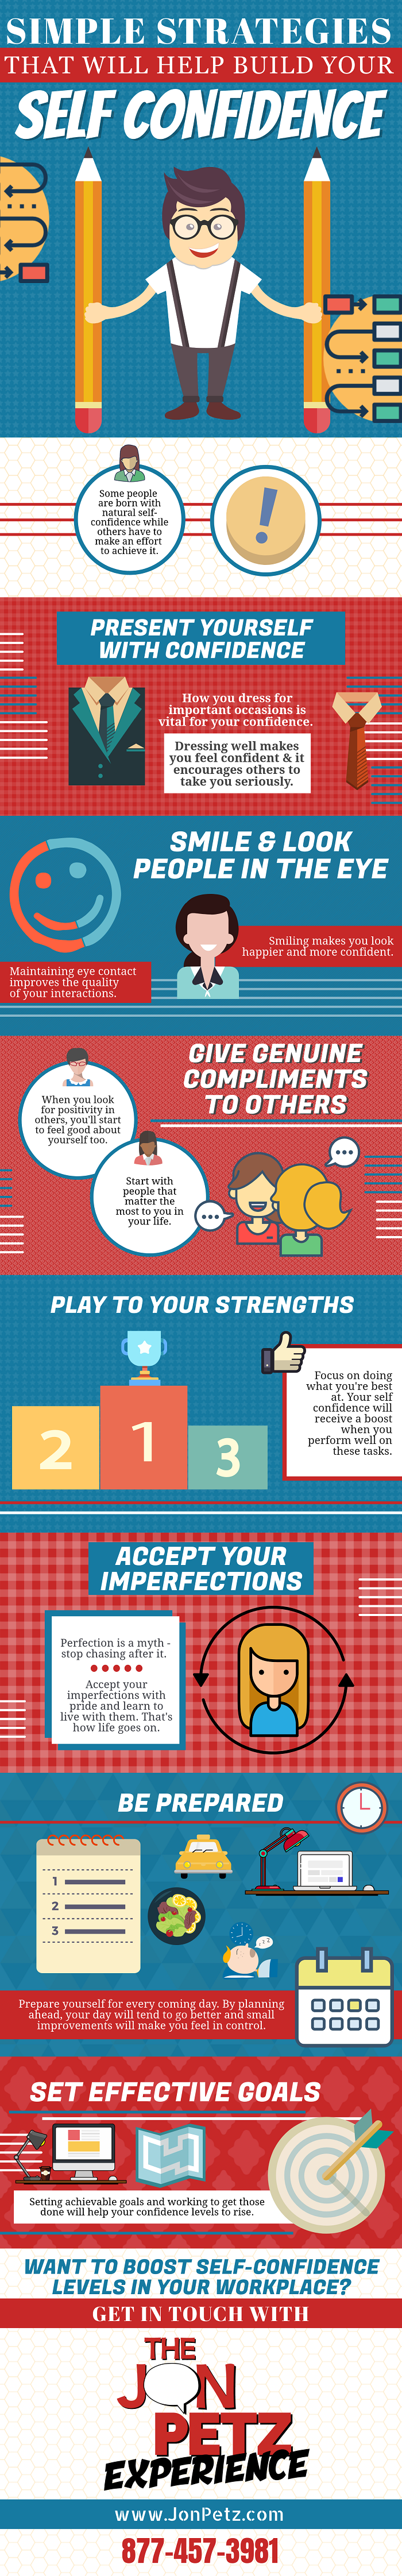 Infographic: Simple Strategies That Will Help Build Your Self Confidence